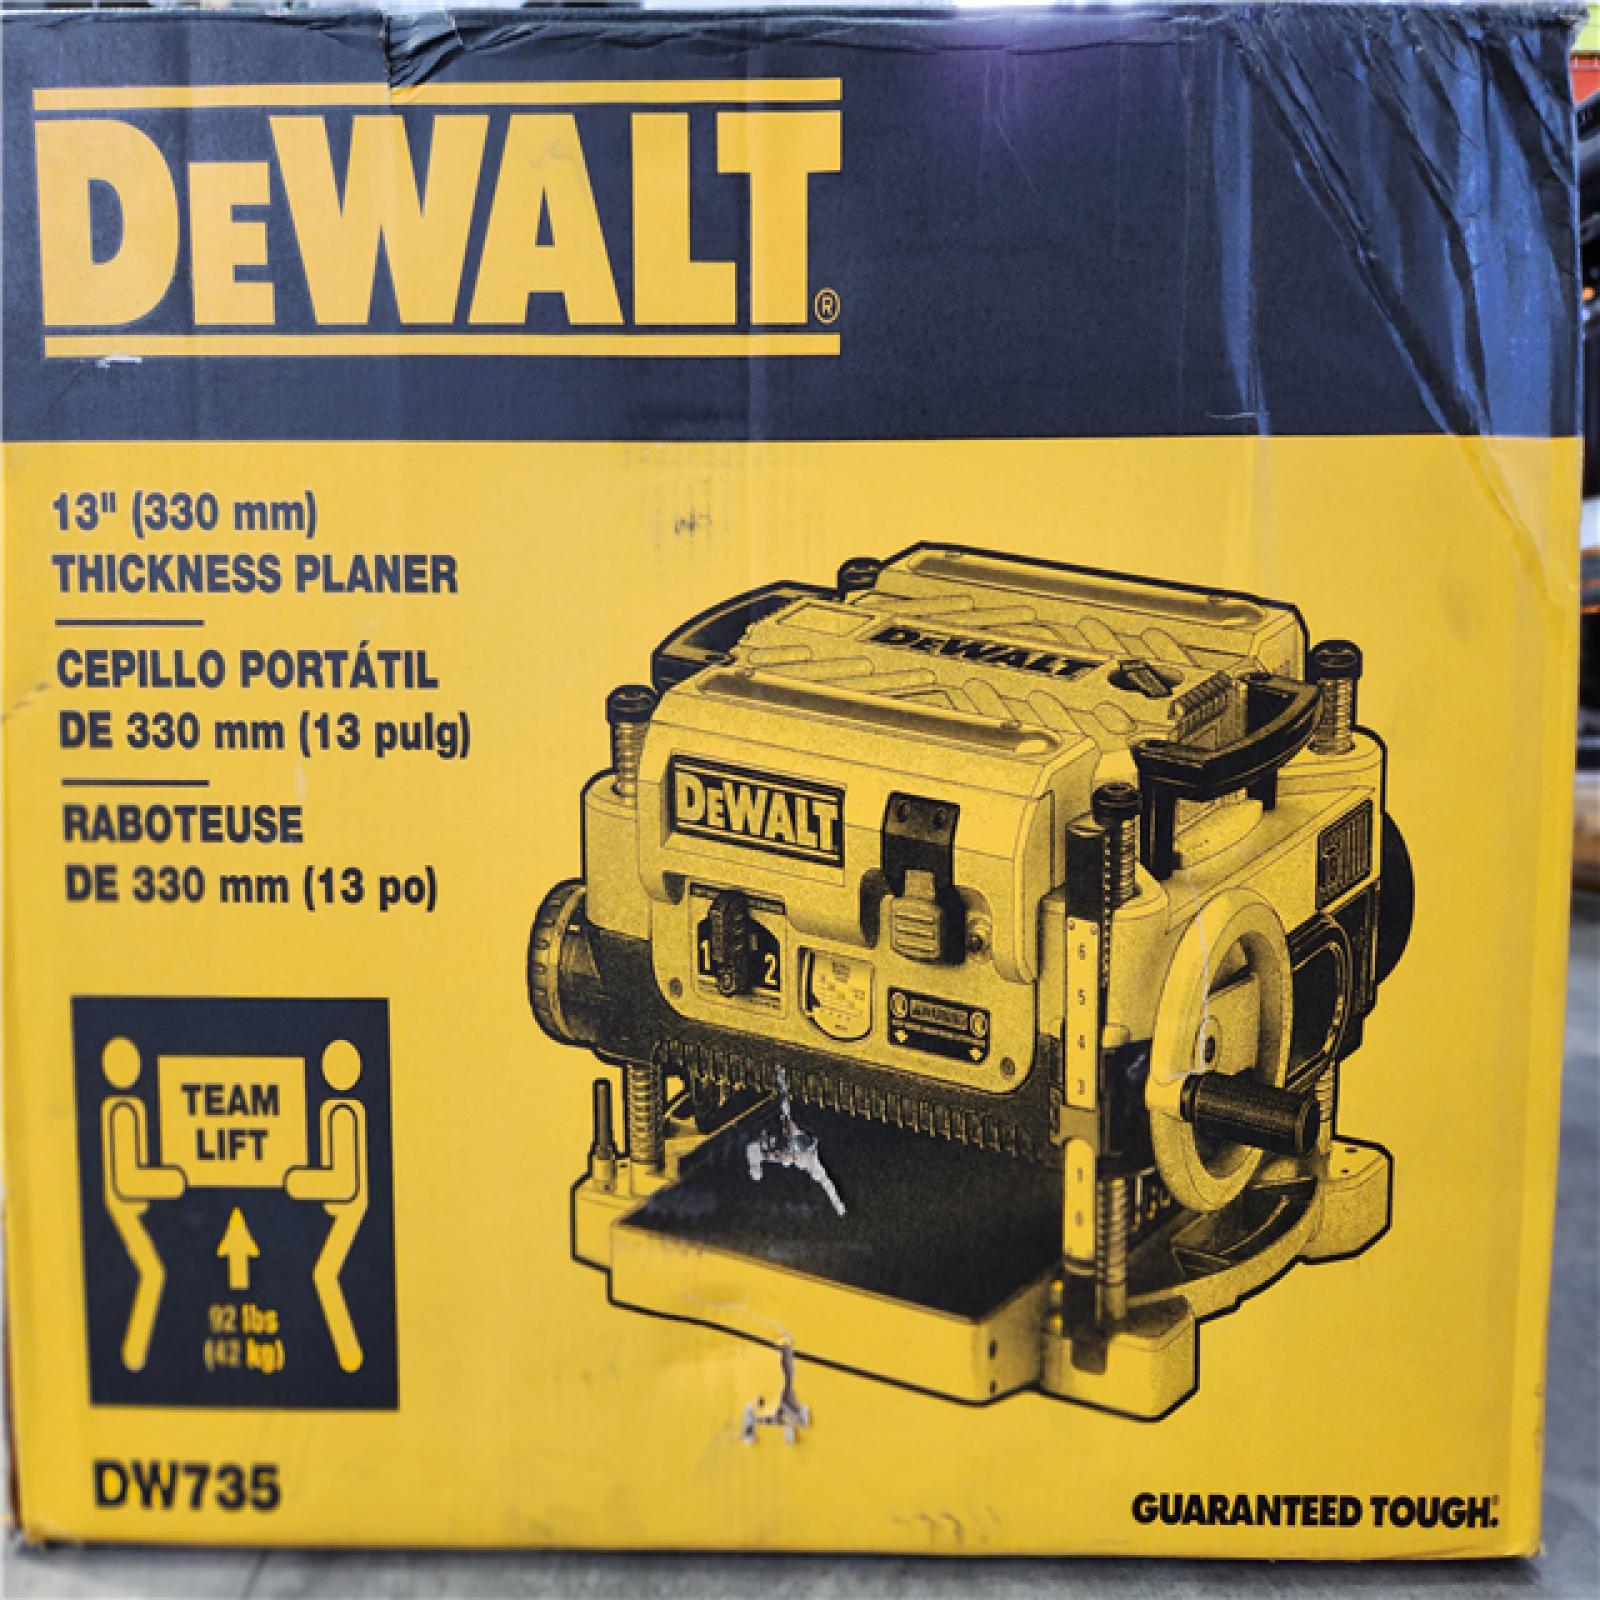 Houston Location - DEWALT 13-inch Three Knife Two Speed Thickness Planer - Appears IN GOOD Condition